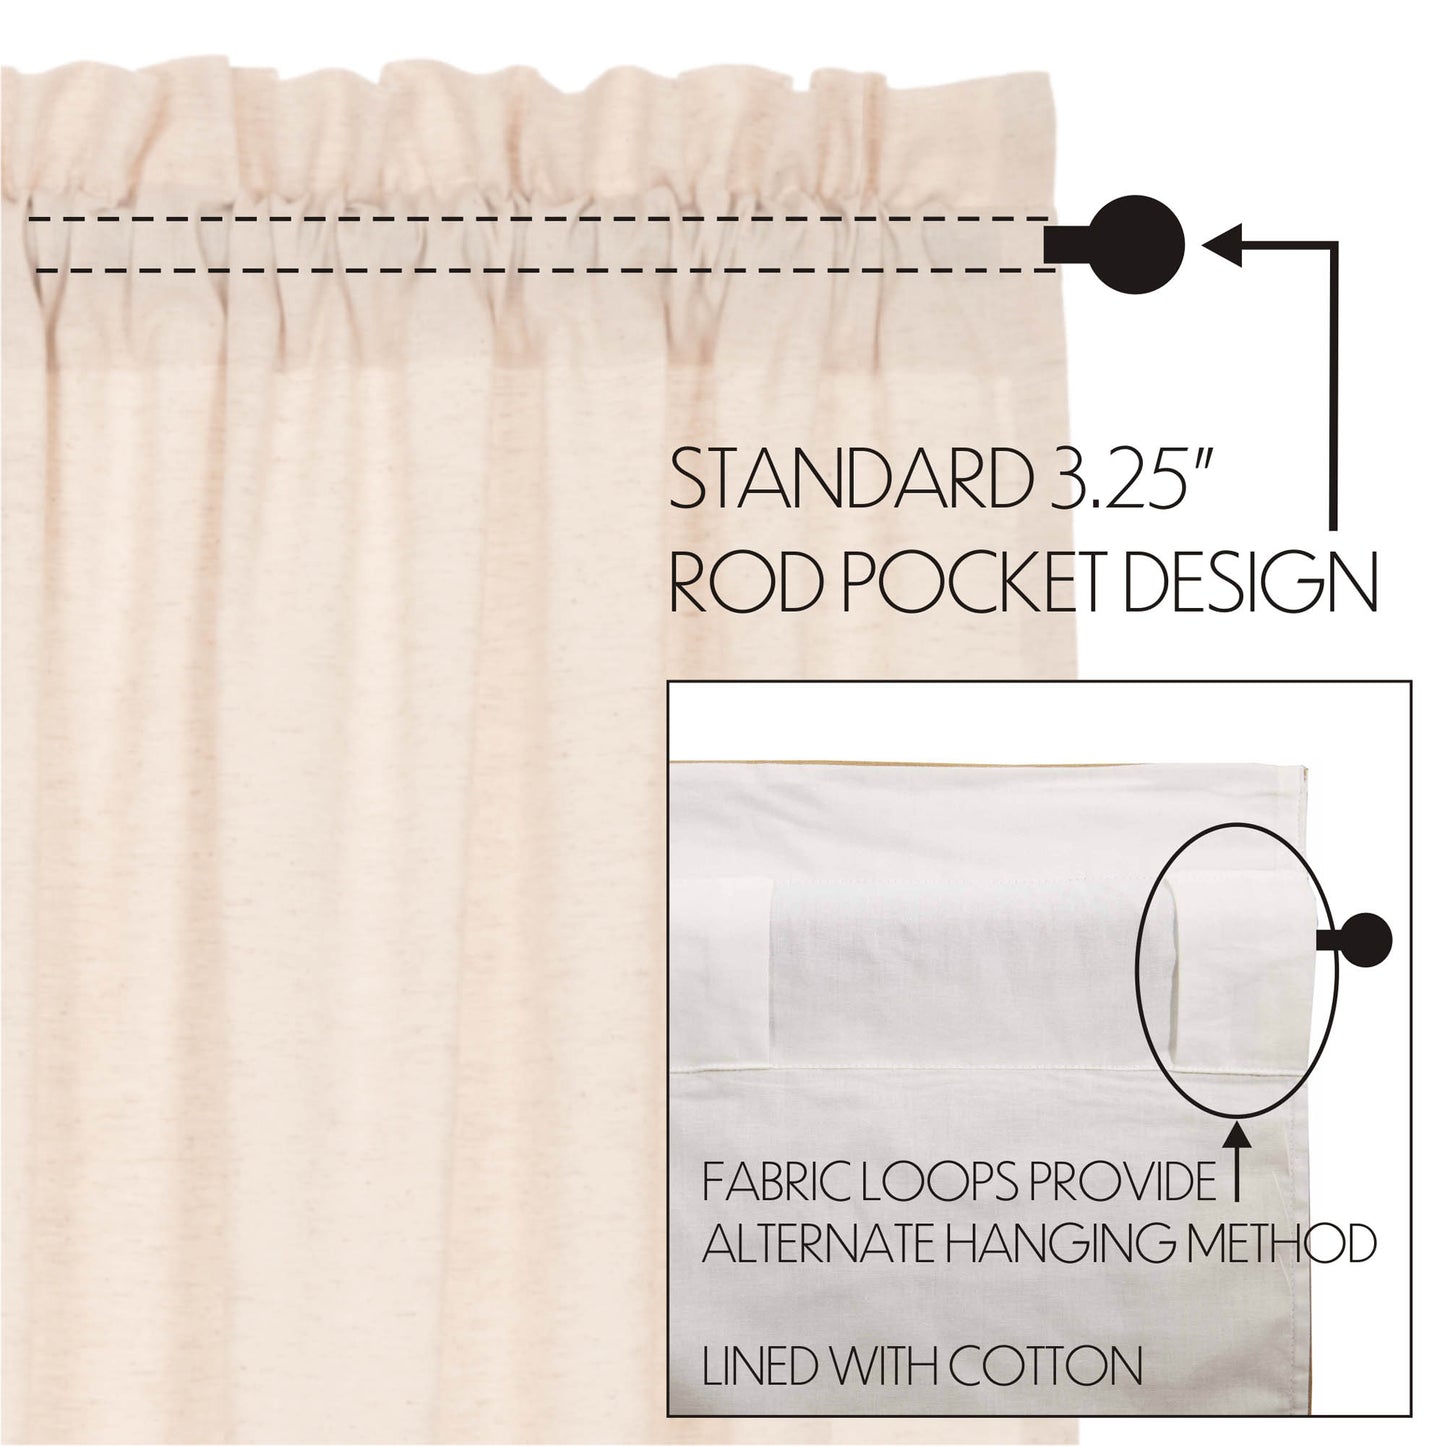 52301-Simple-Life-Flax-Natural-Valance-16x60-image-3